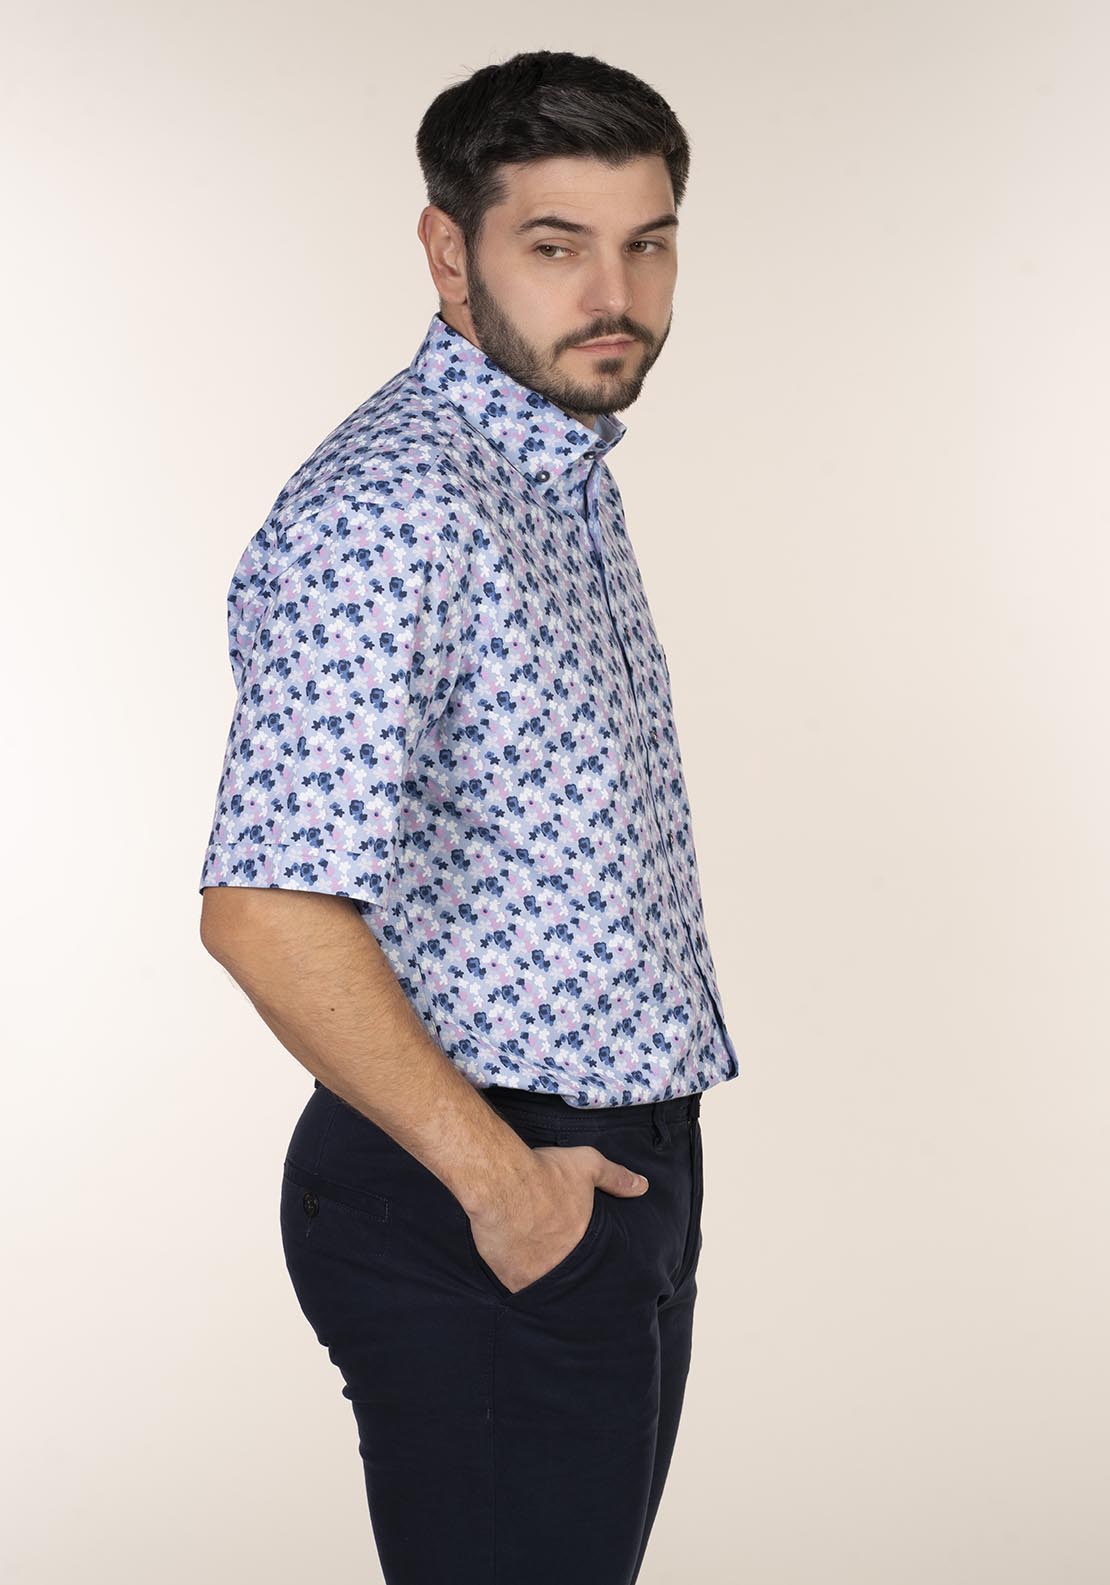 Yeats Casual Patterned Short Sleeve Shirt - Pink 6 Shaws Department Stores